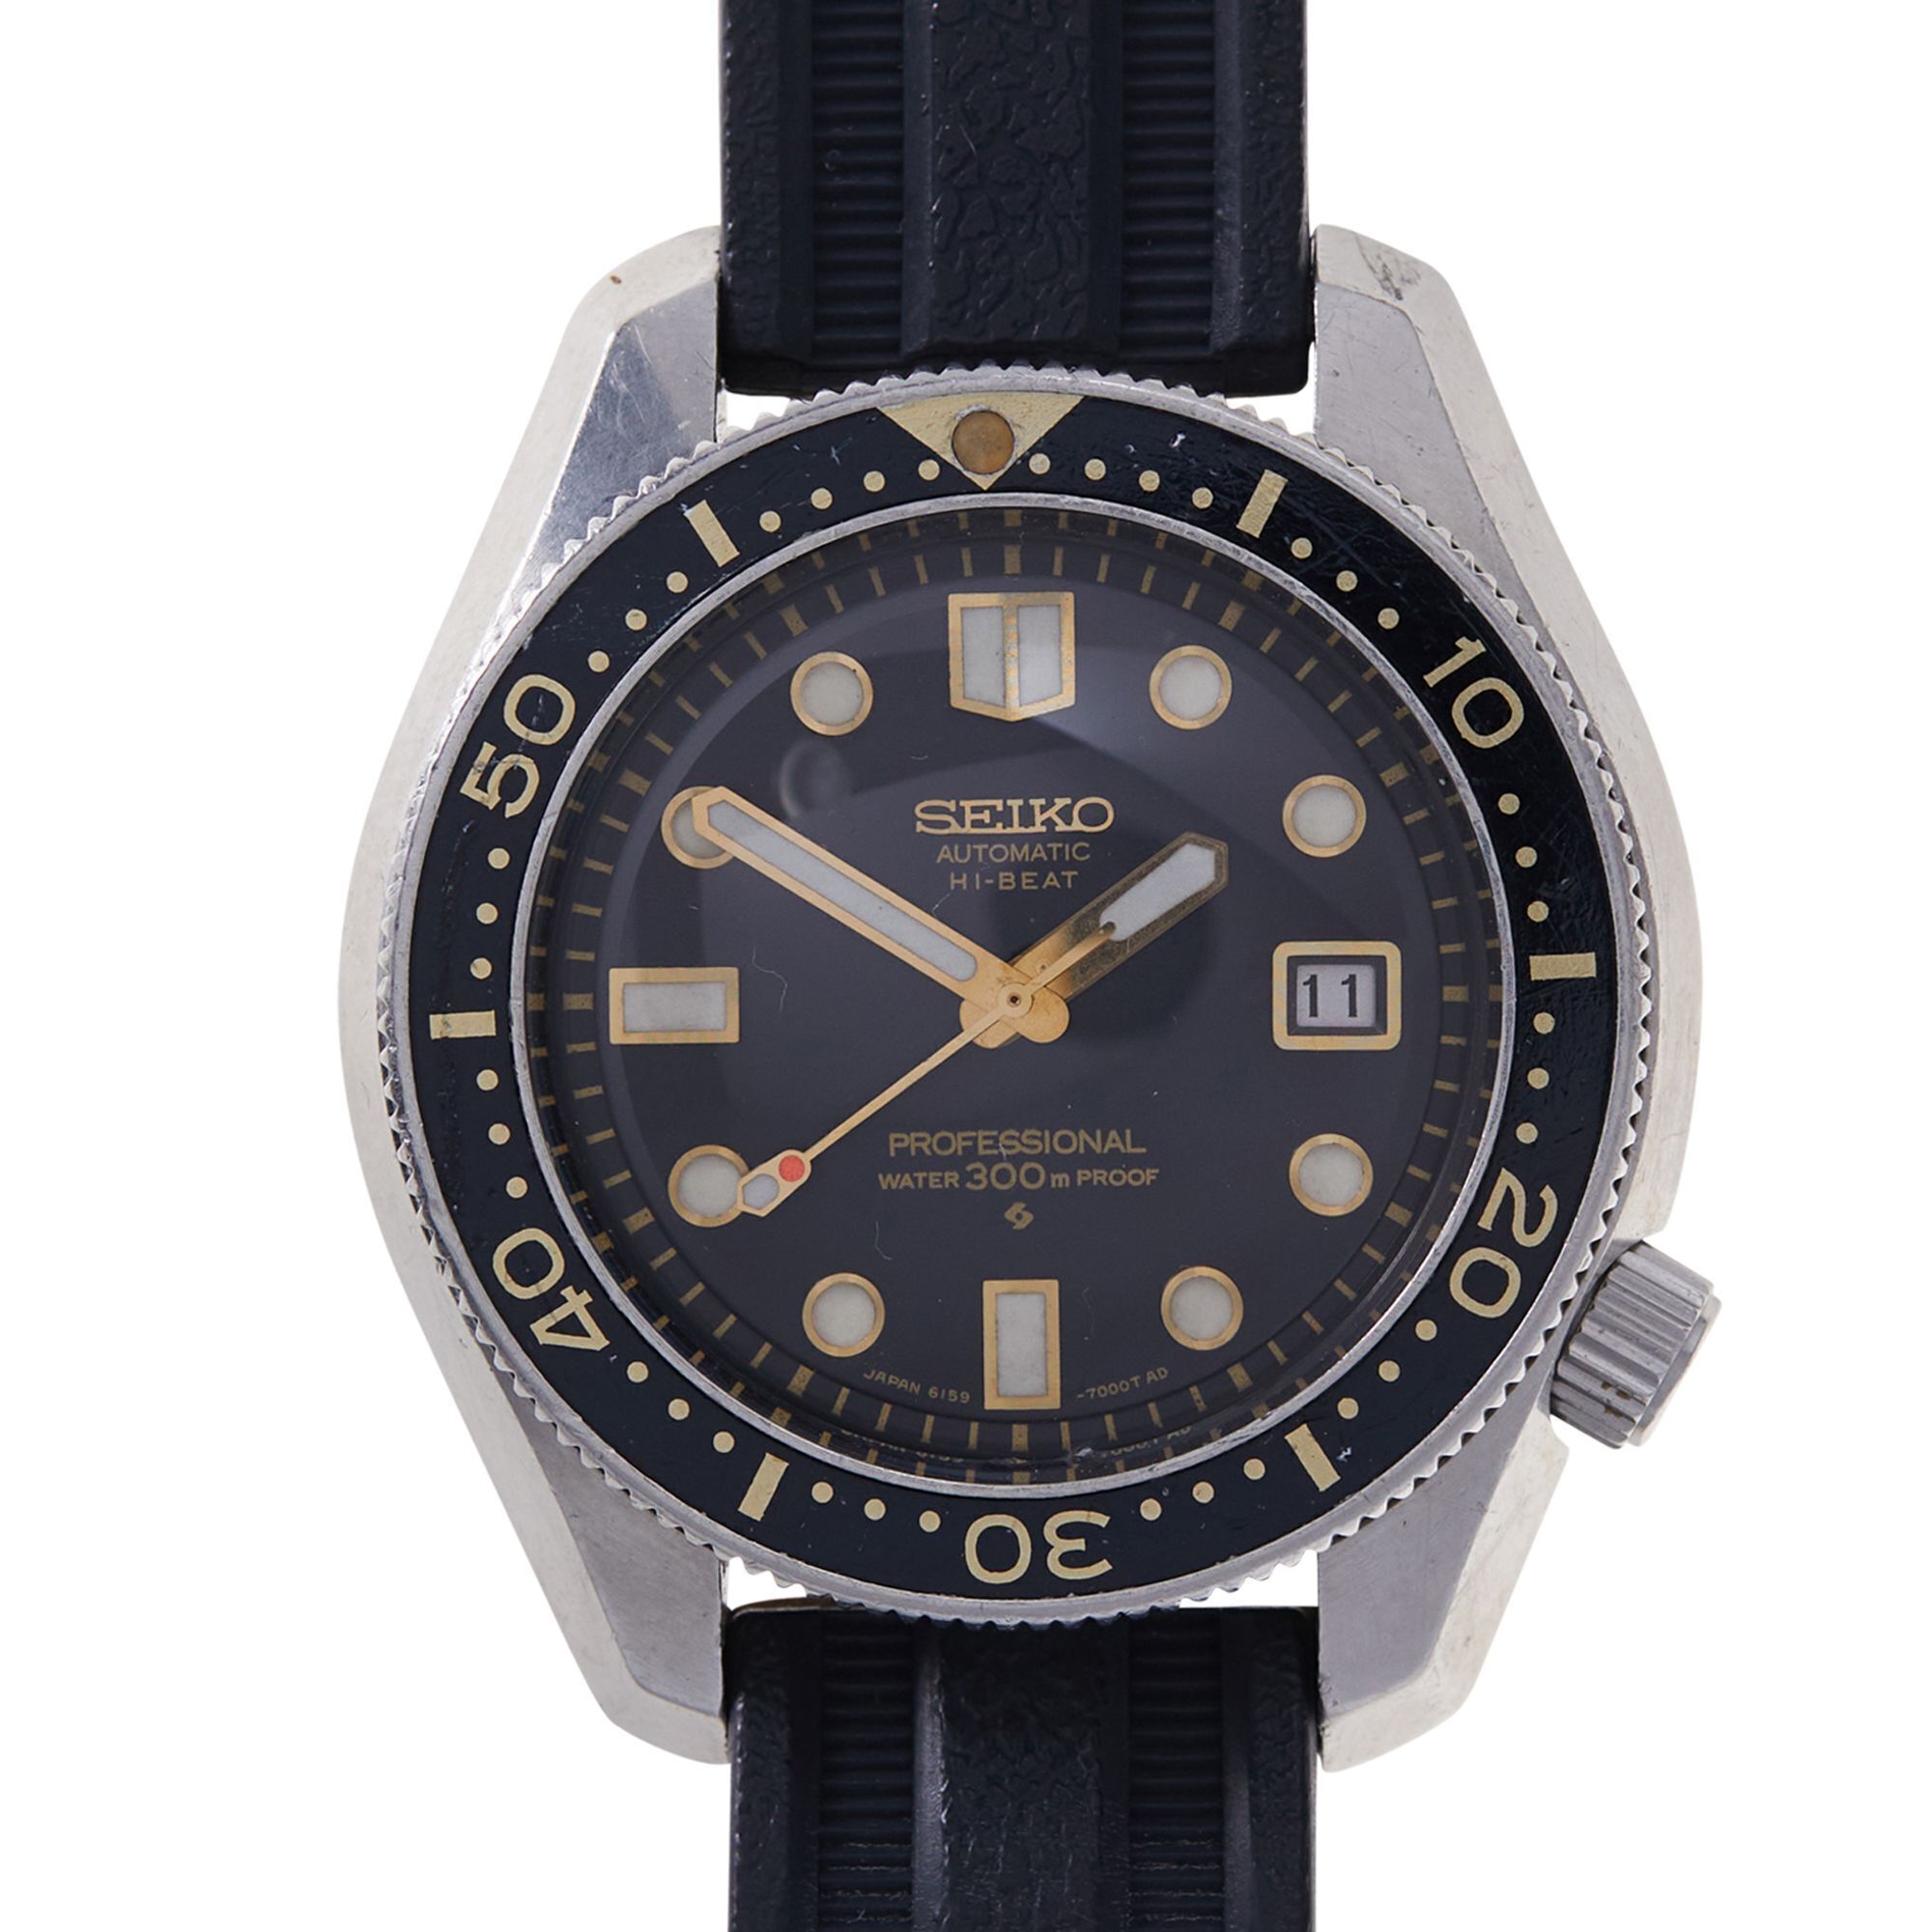 Rare Seiko Hi-Beat Stainless Steel Automatic Diver's Watch